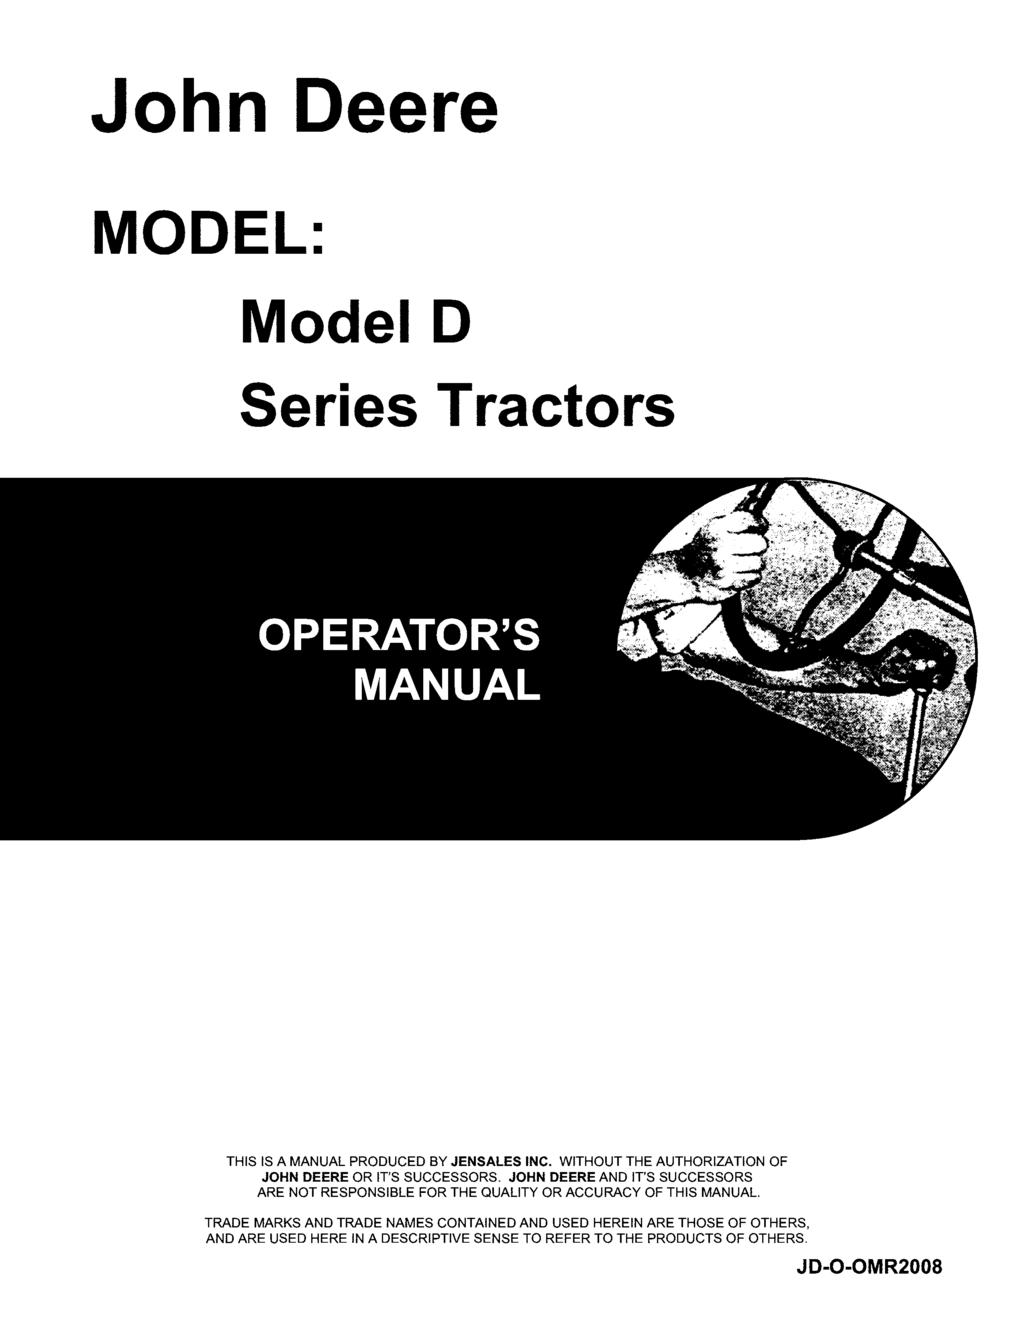 John Deere MODEL: Model D Series Tractors THIS IS A MANUAL PRODUCED BY JENSALES INC. WITHOUT THE AUTHORIZATION OF JOHN DEERE OR IT'S SUCCESSORS.